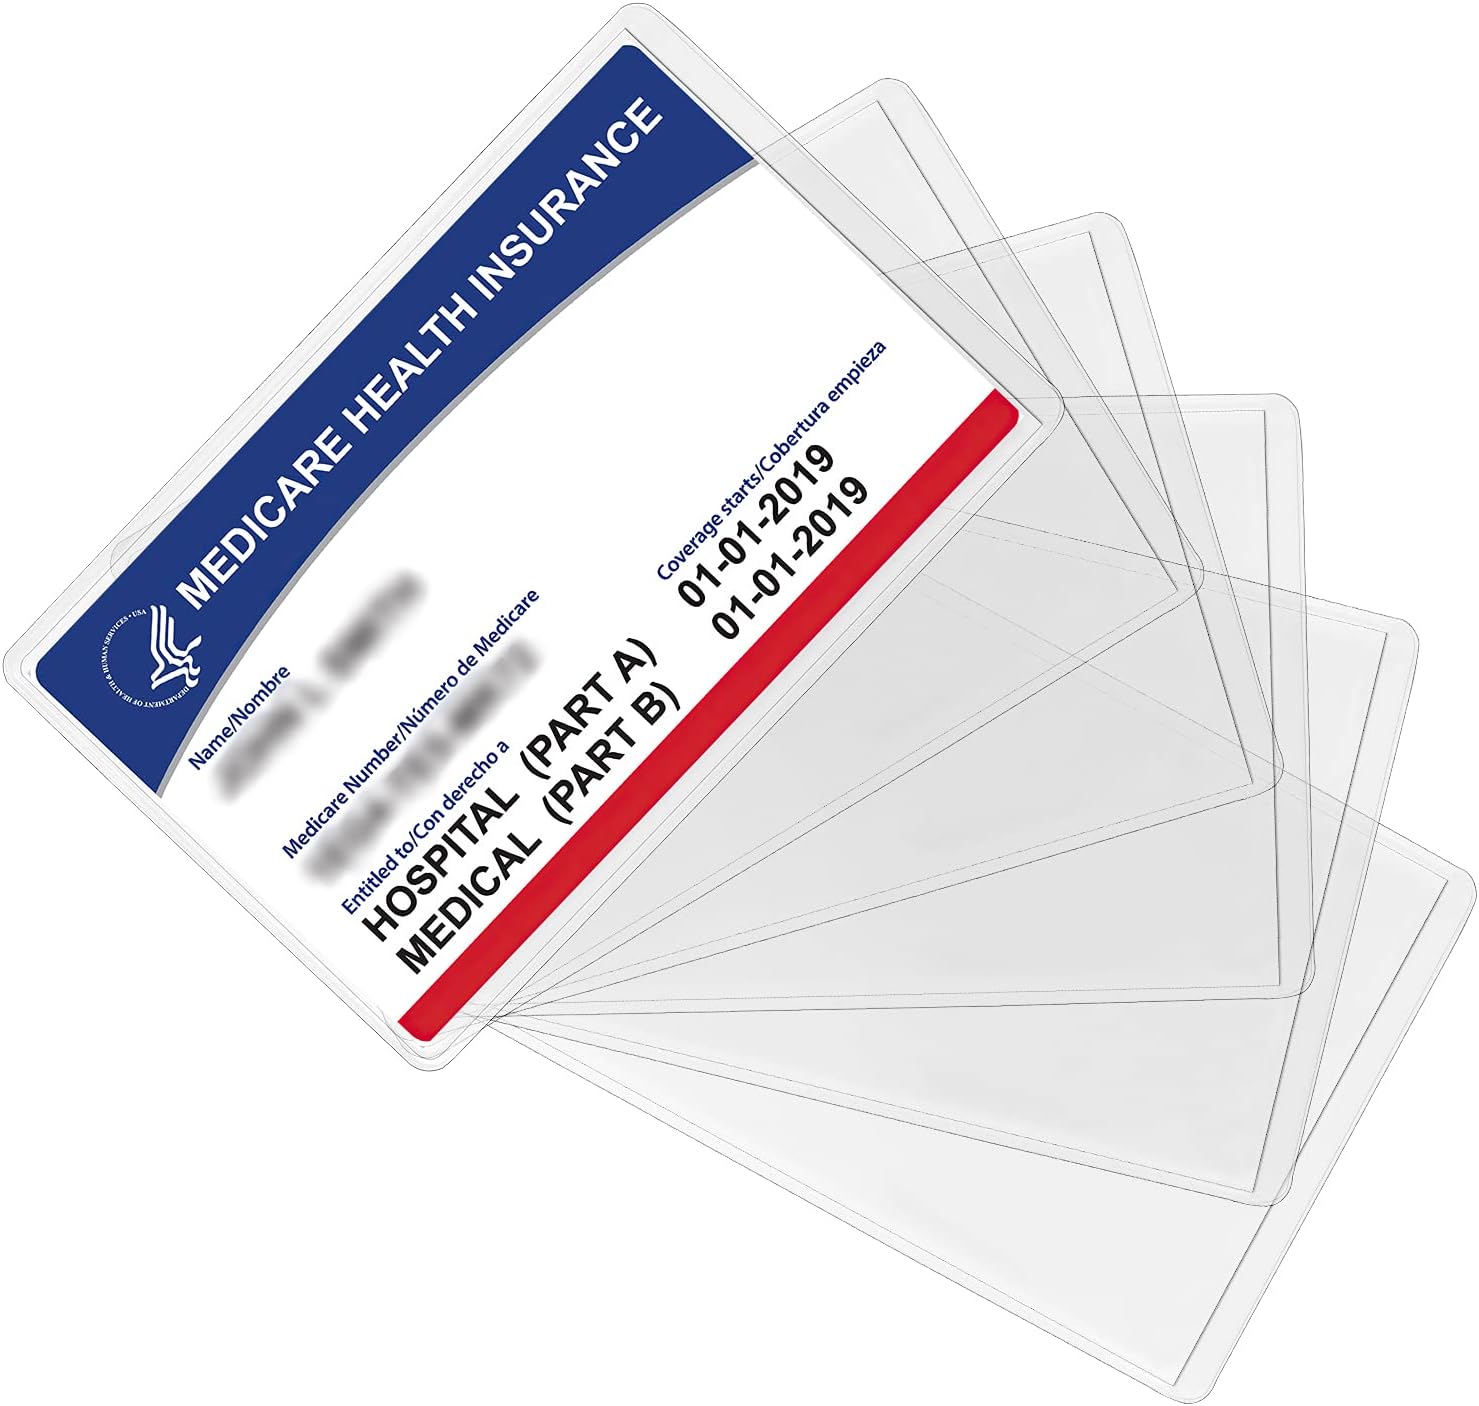 Sooez 10 Pack New Medicare Card Holder Protector Sleeves, 12Mil Clear PVC Soft Water Resistant Medicare Card Protector Sleeves for New Medicare Card Credit Card Business Card Social Security Card